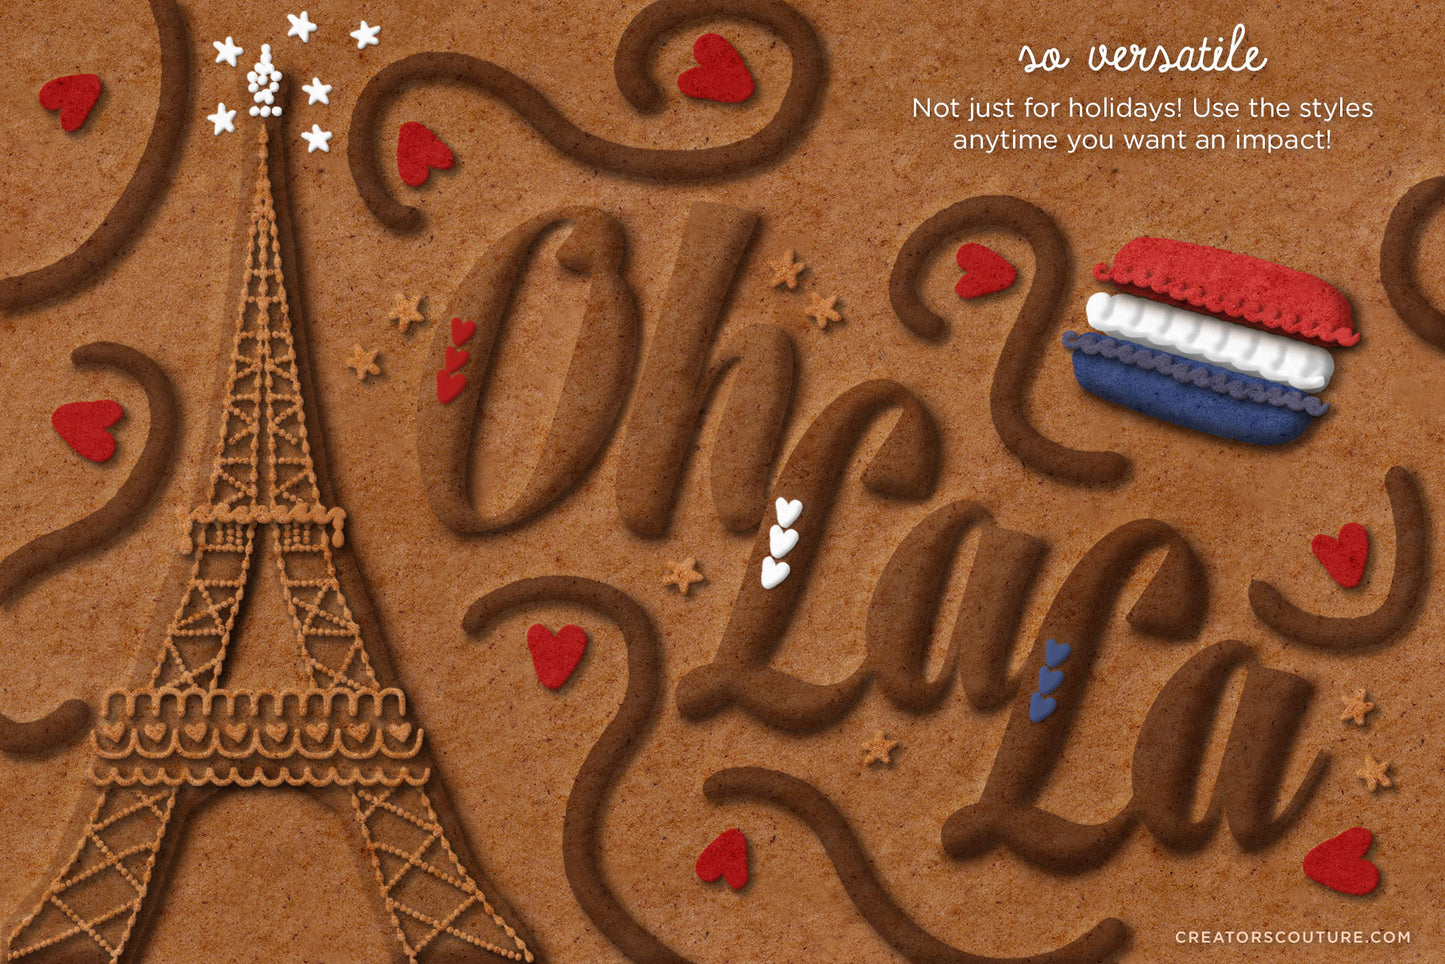 Gingerbread, Cookie, & Cake Graphic & Lettering Effects for Photoshop, cake eiffel tower and macaron ooh la la